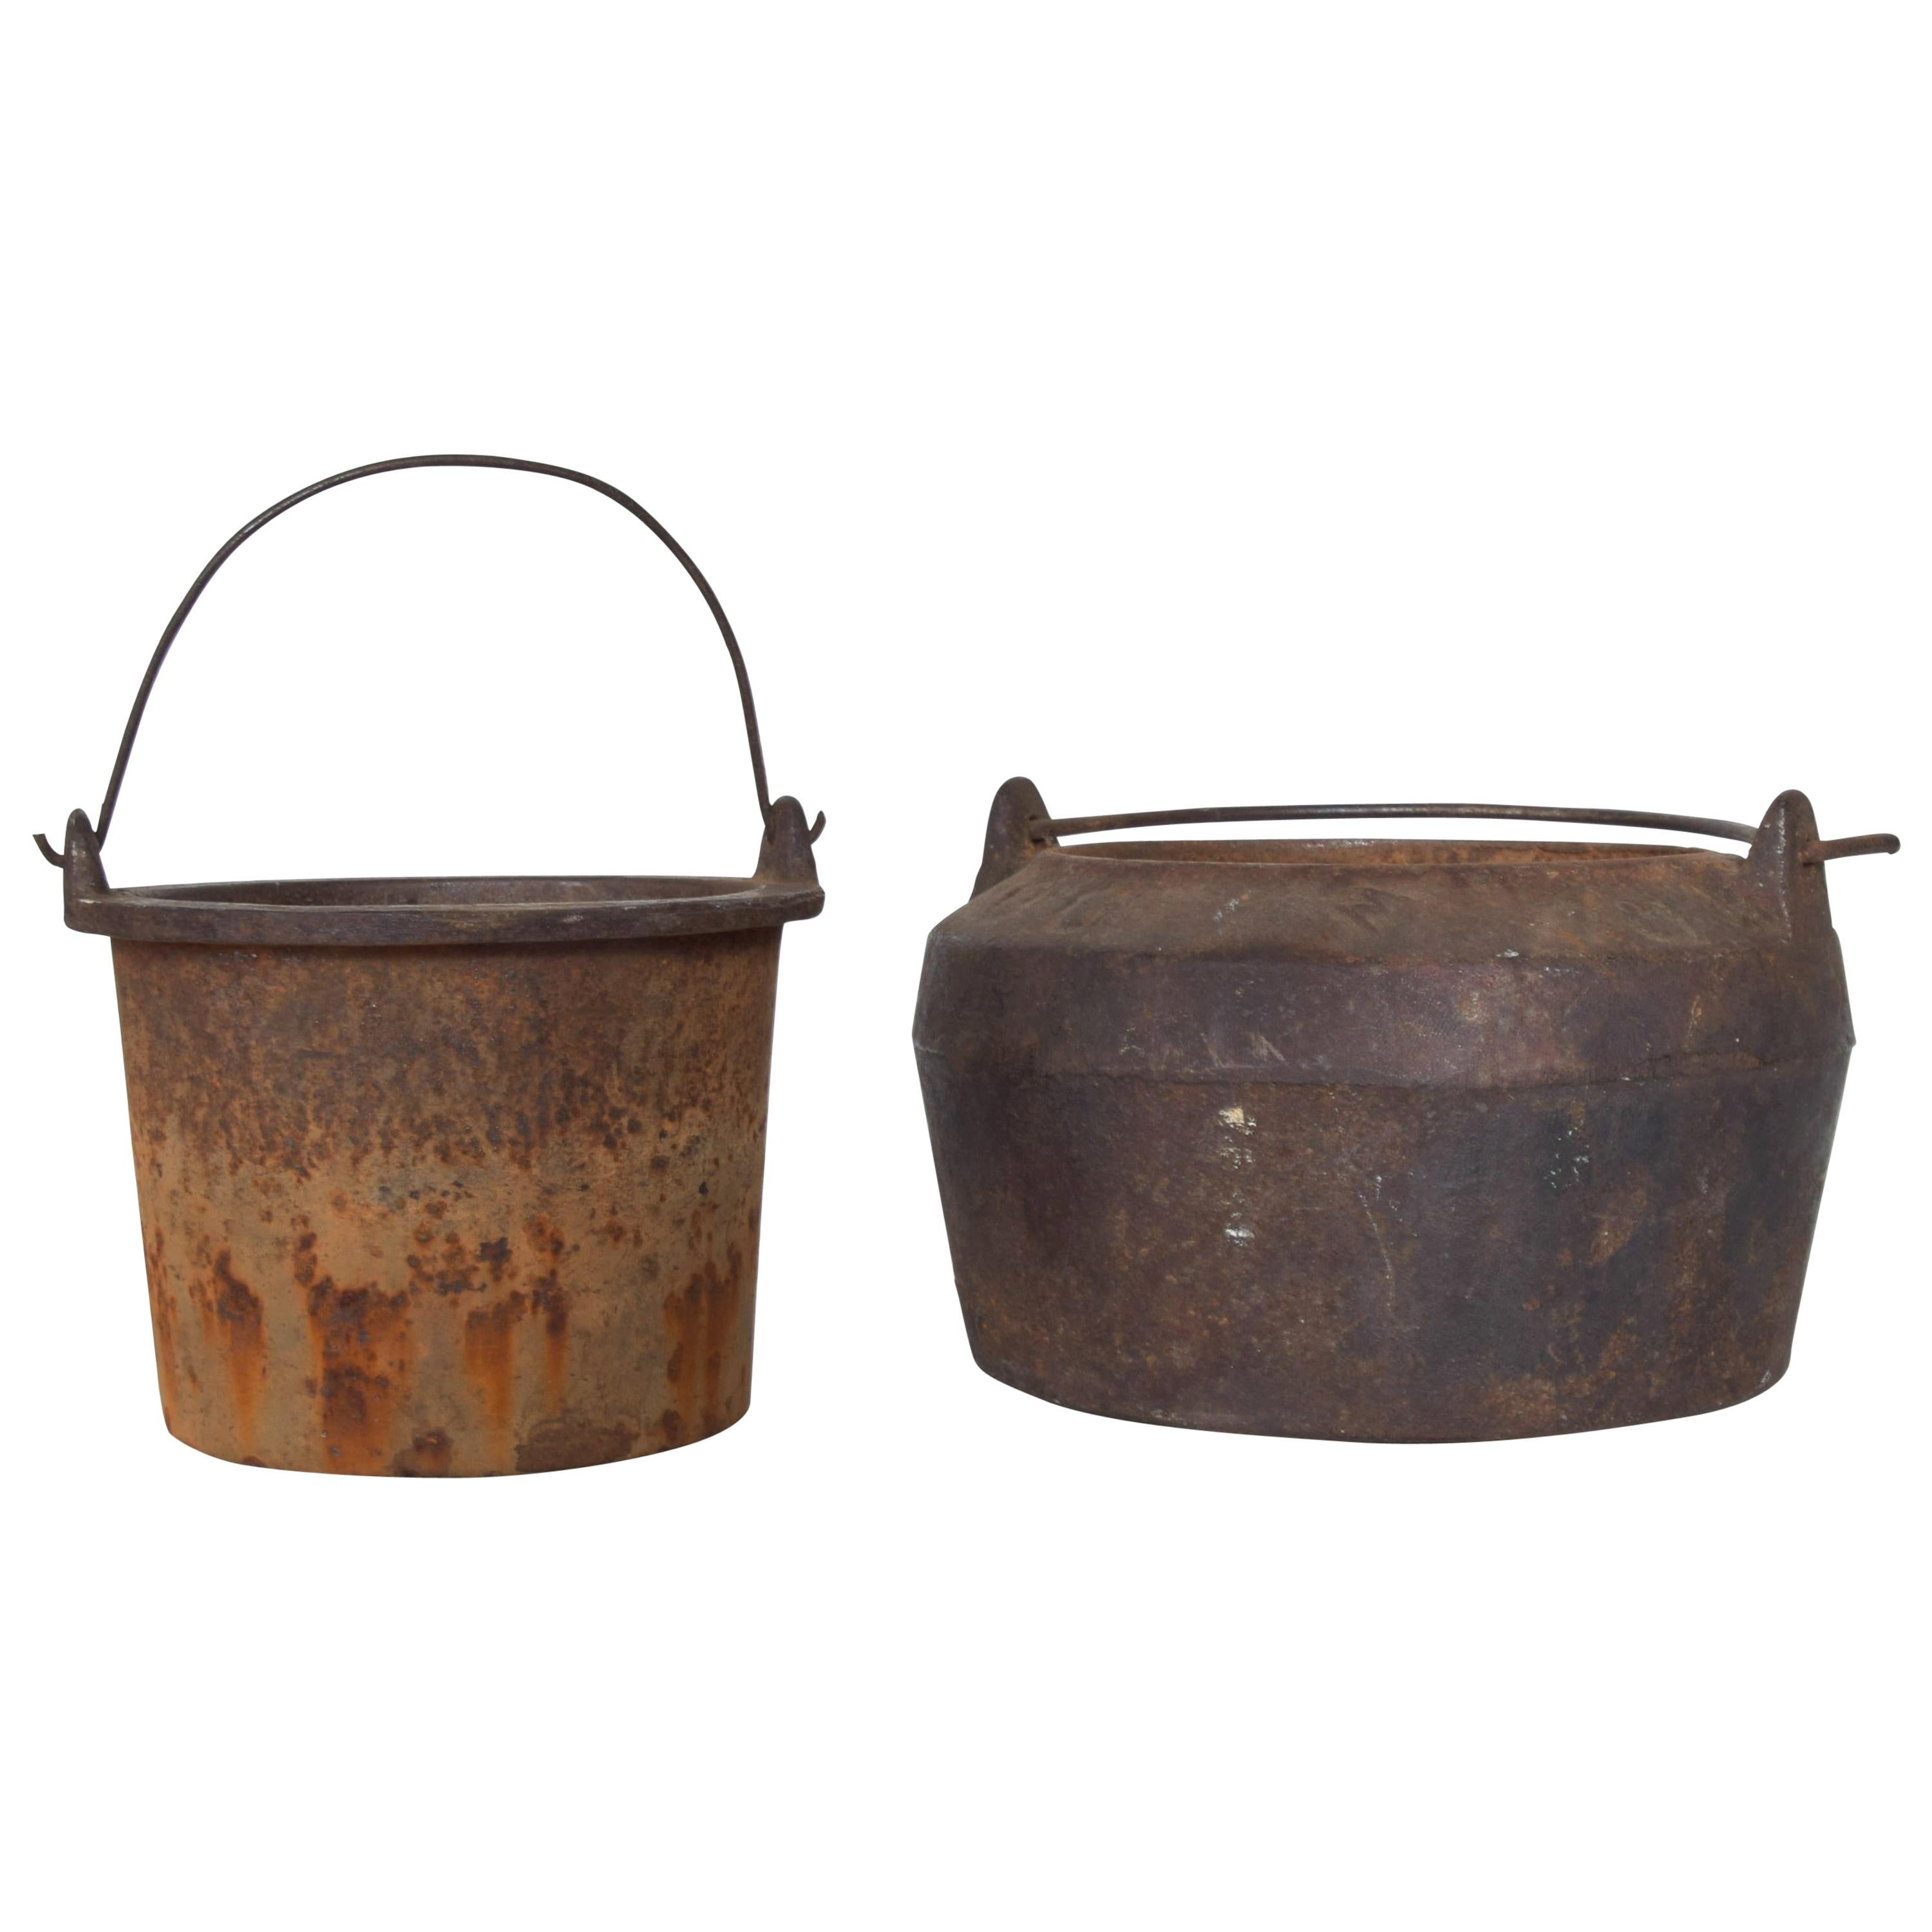 Rustic Set of Foundry Melting Pots Industrial Patinated Cauldron 